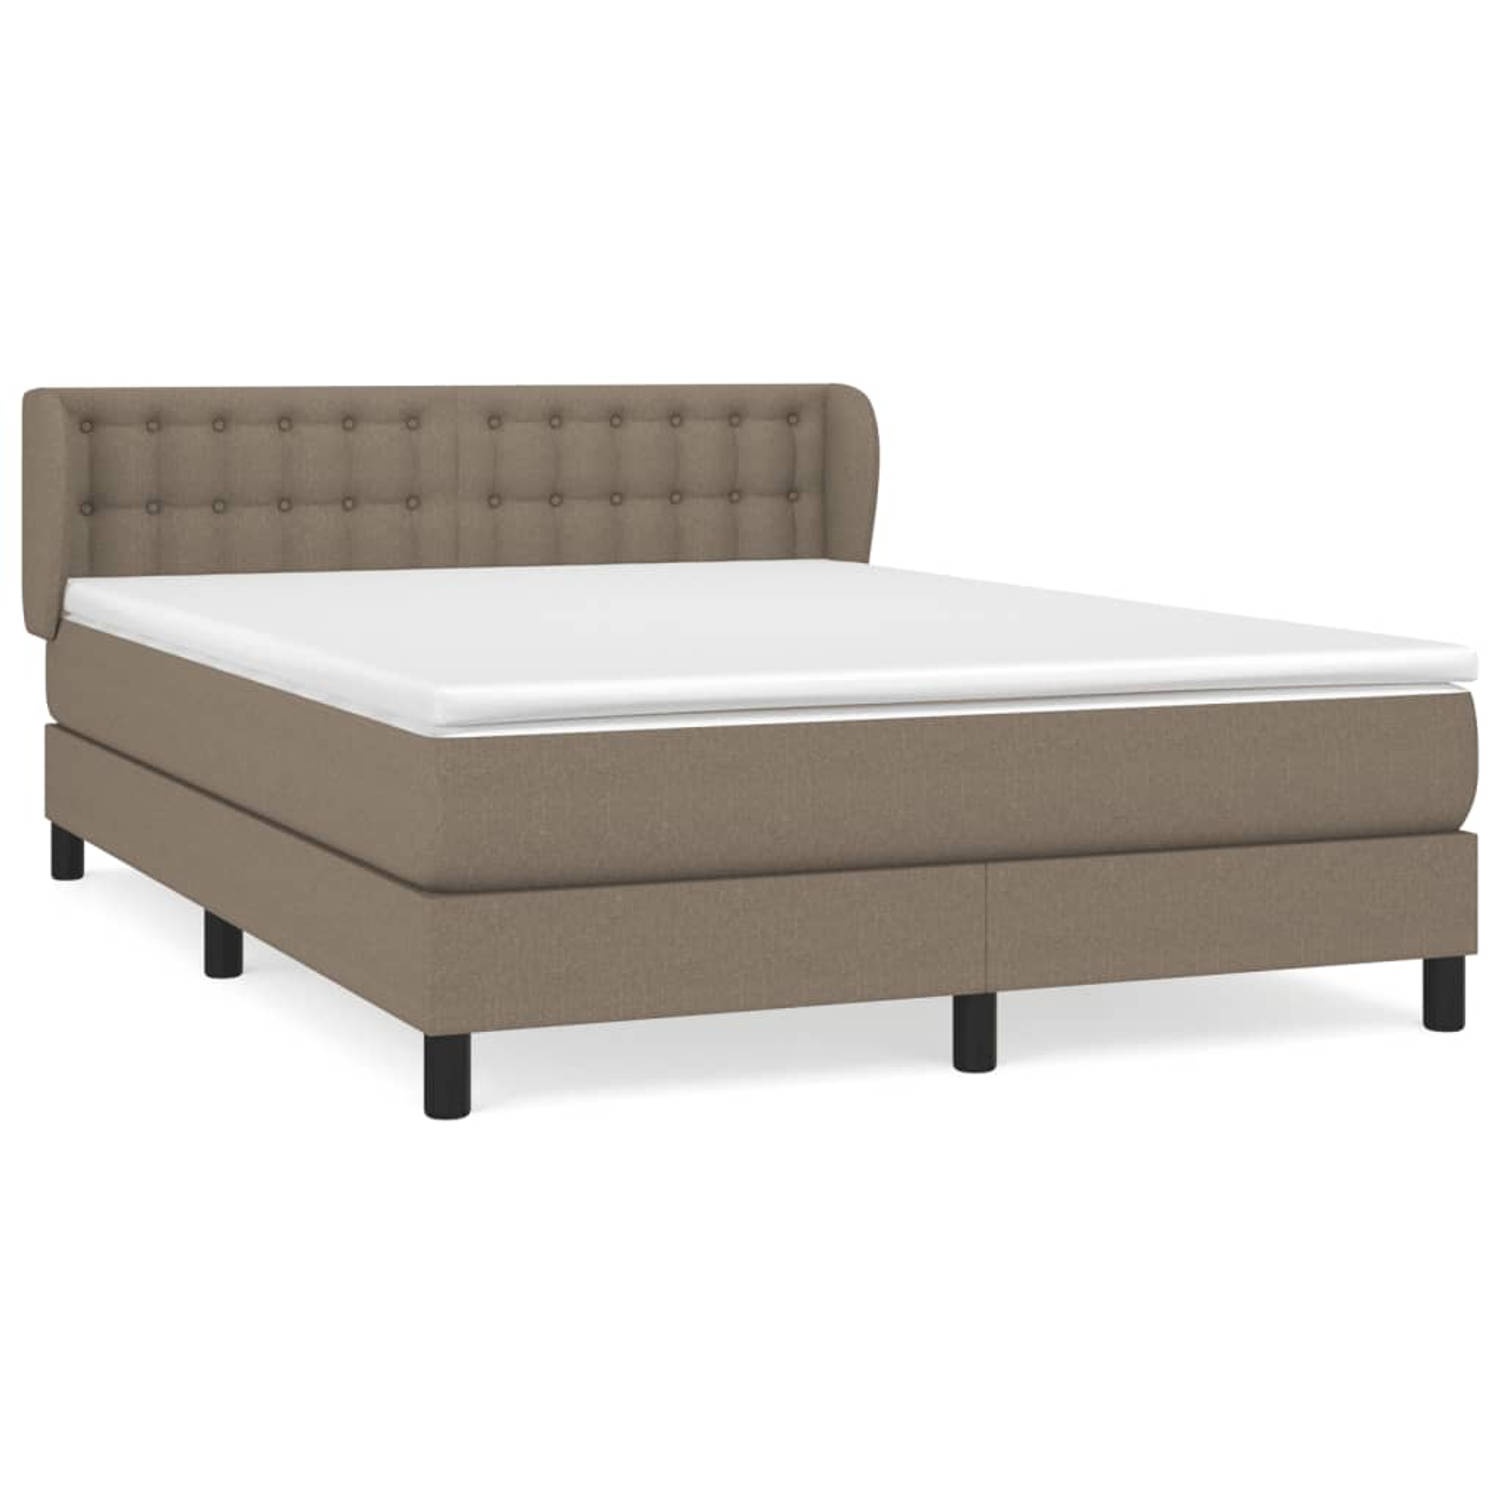 The Living Store Boxspringbed - Comfort - Bed - 193 x 147 x 78/88 cm - Taupe - Pocketvering matras - Middelharde